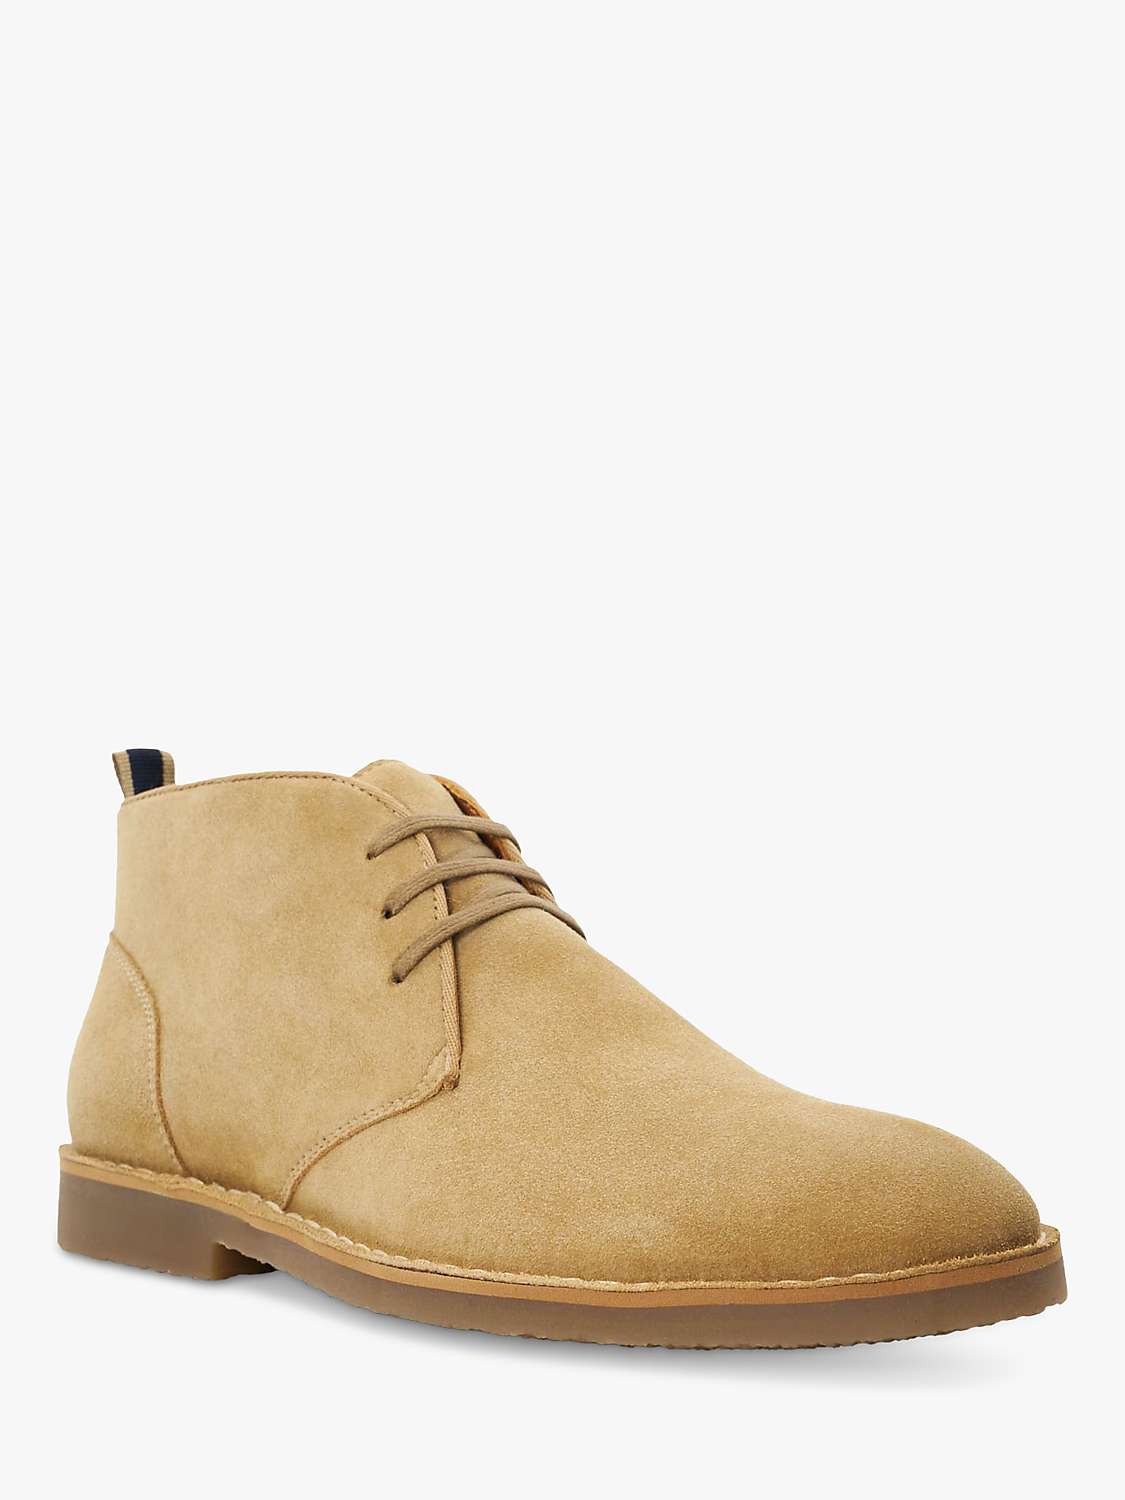 Buy Dune Cashed Suede Lace Up Chukka Boots, Beige Online at johnlewis.com